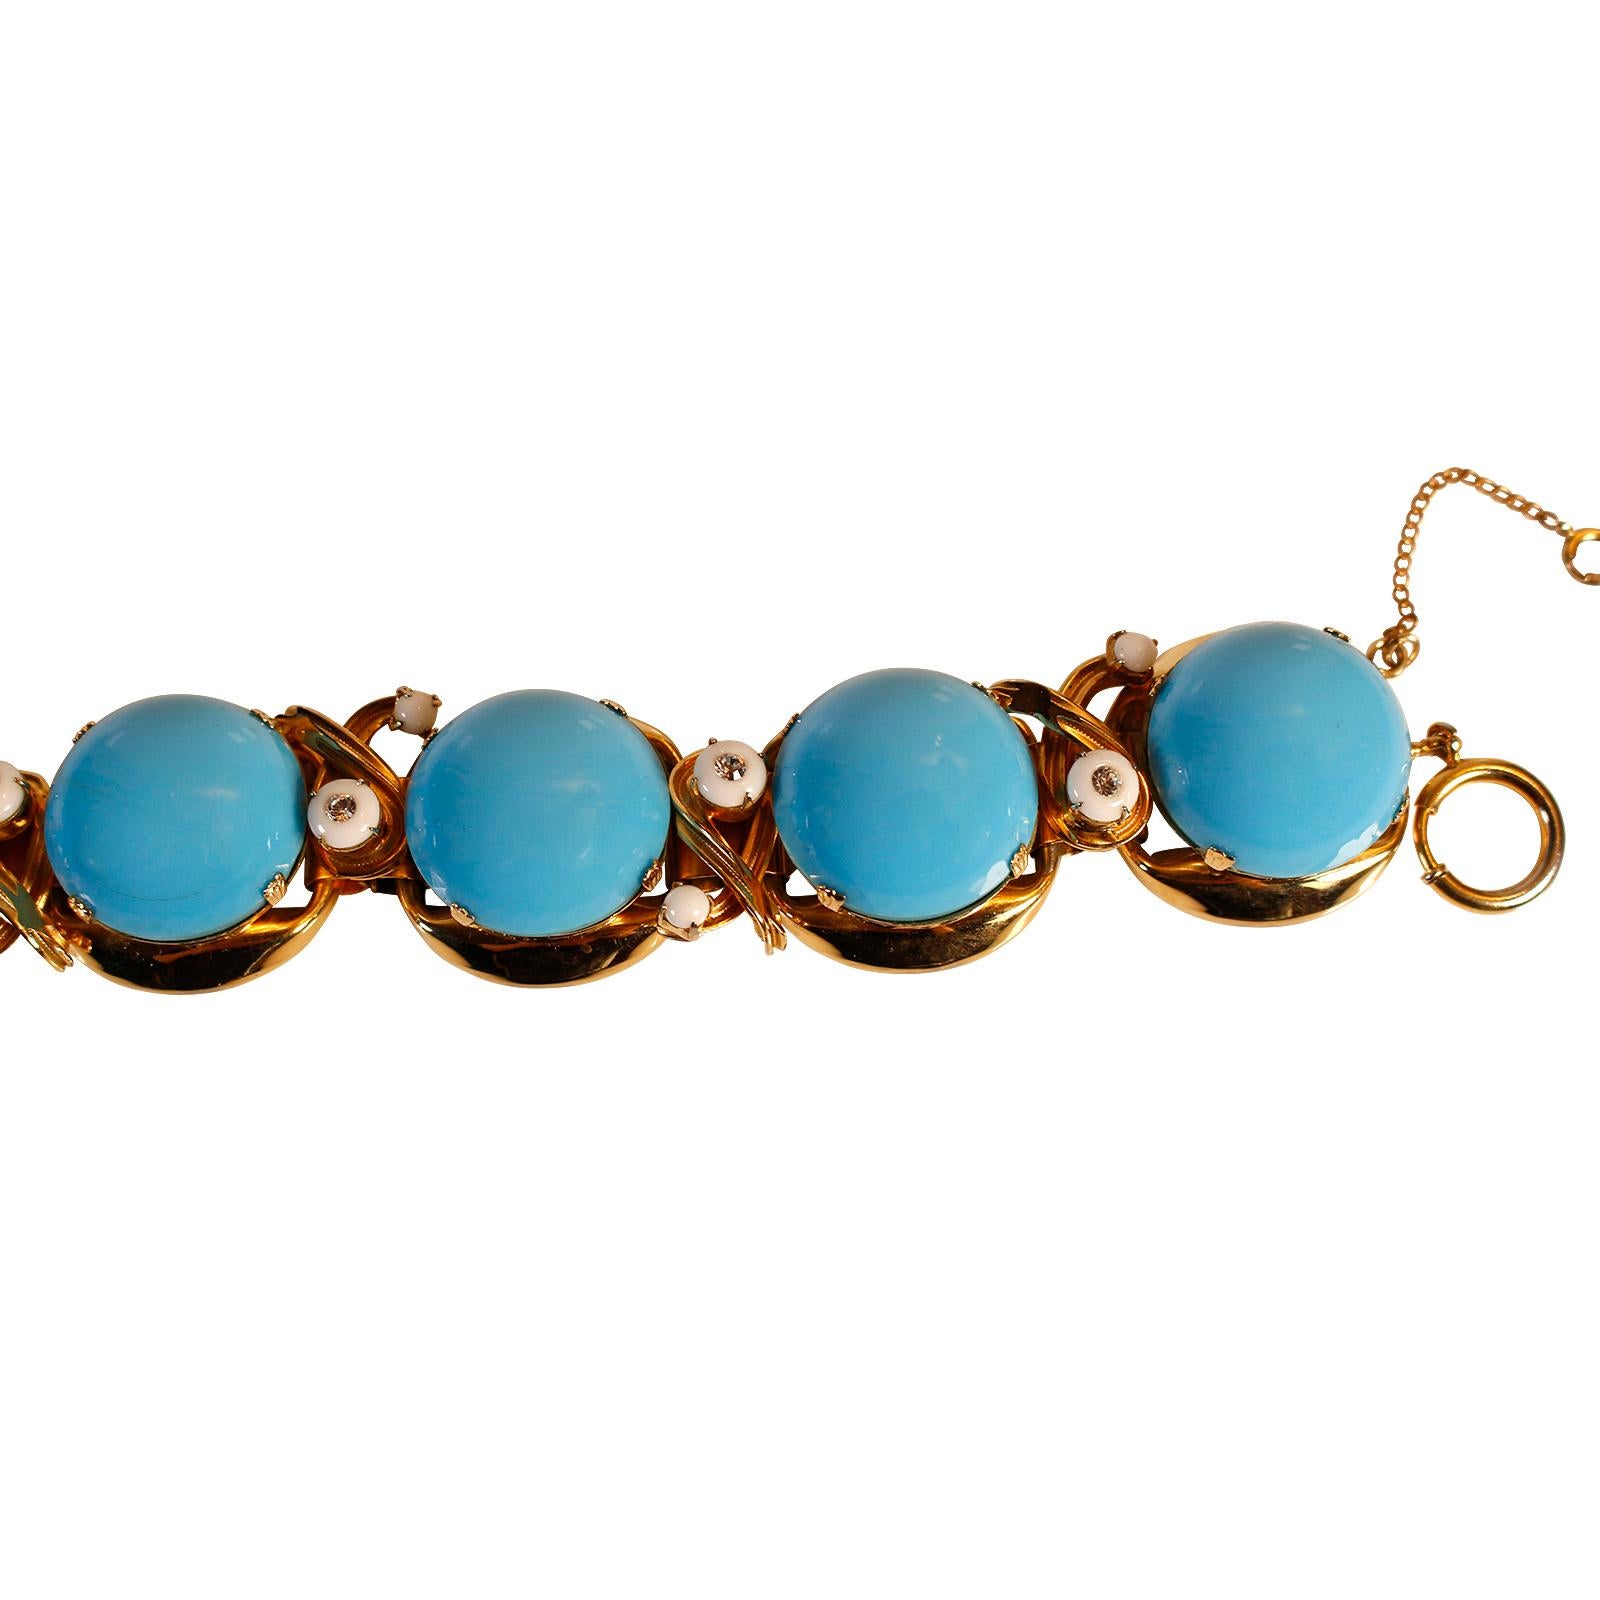 Vintage Unsigned Gold and Faux Turquoise Bracelet Circa 1960s For Sale 10